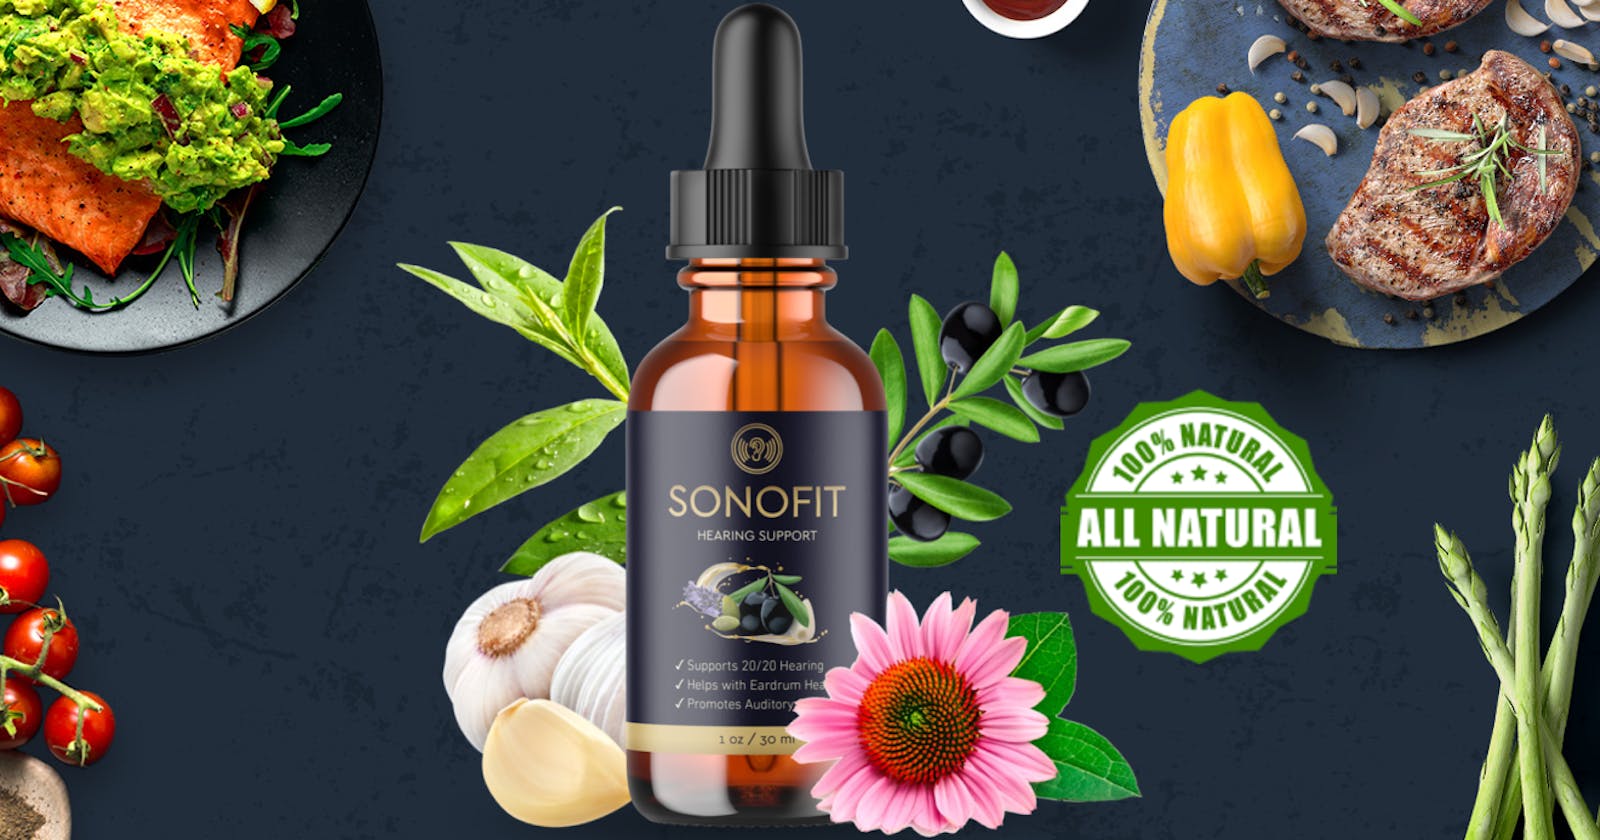 SonoFit {Clinically Proven} Promotes Auditory Clarity Most Worth It For Hearing Health And Tinnitus(REAL OR HOAX)